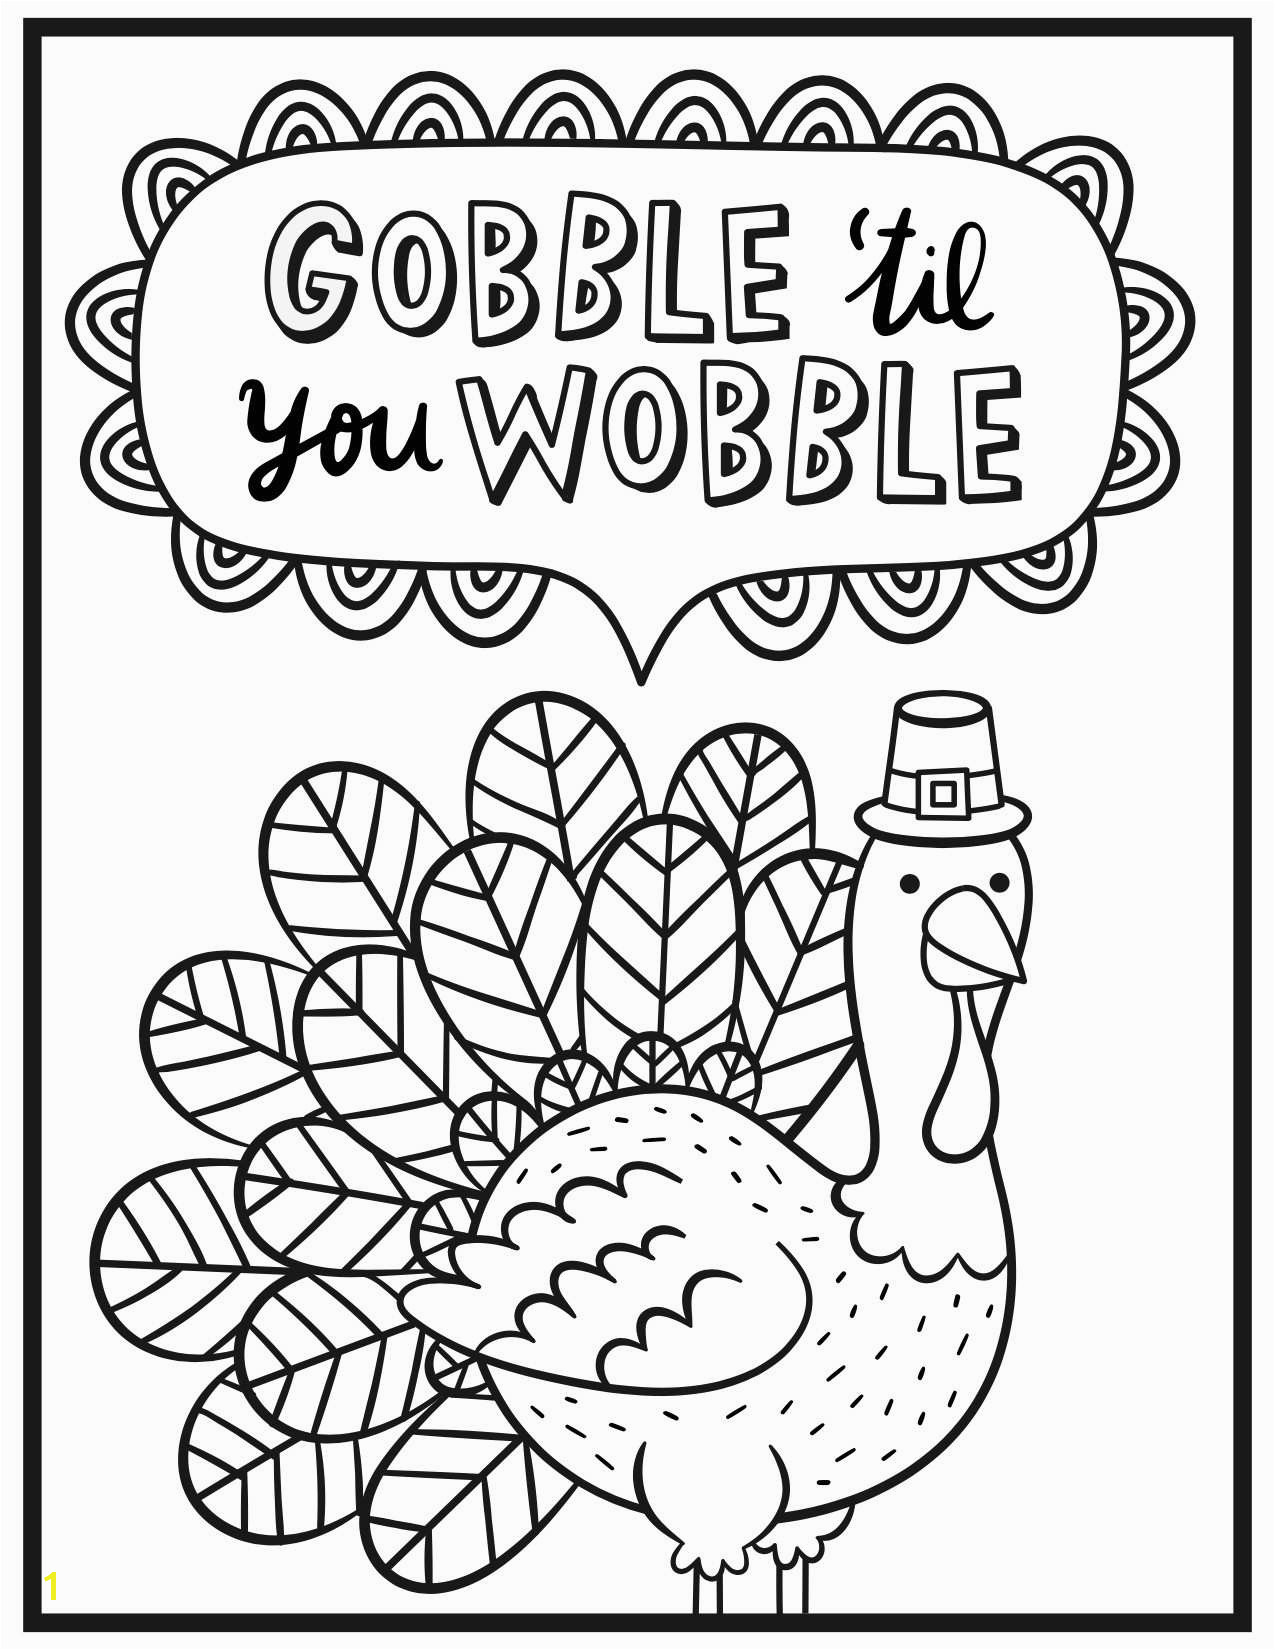 Turkey Coloring Pages for Adults Awesome Turkey Coloring Pages Printable Best Best Coloring Page Adult Od